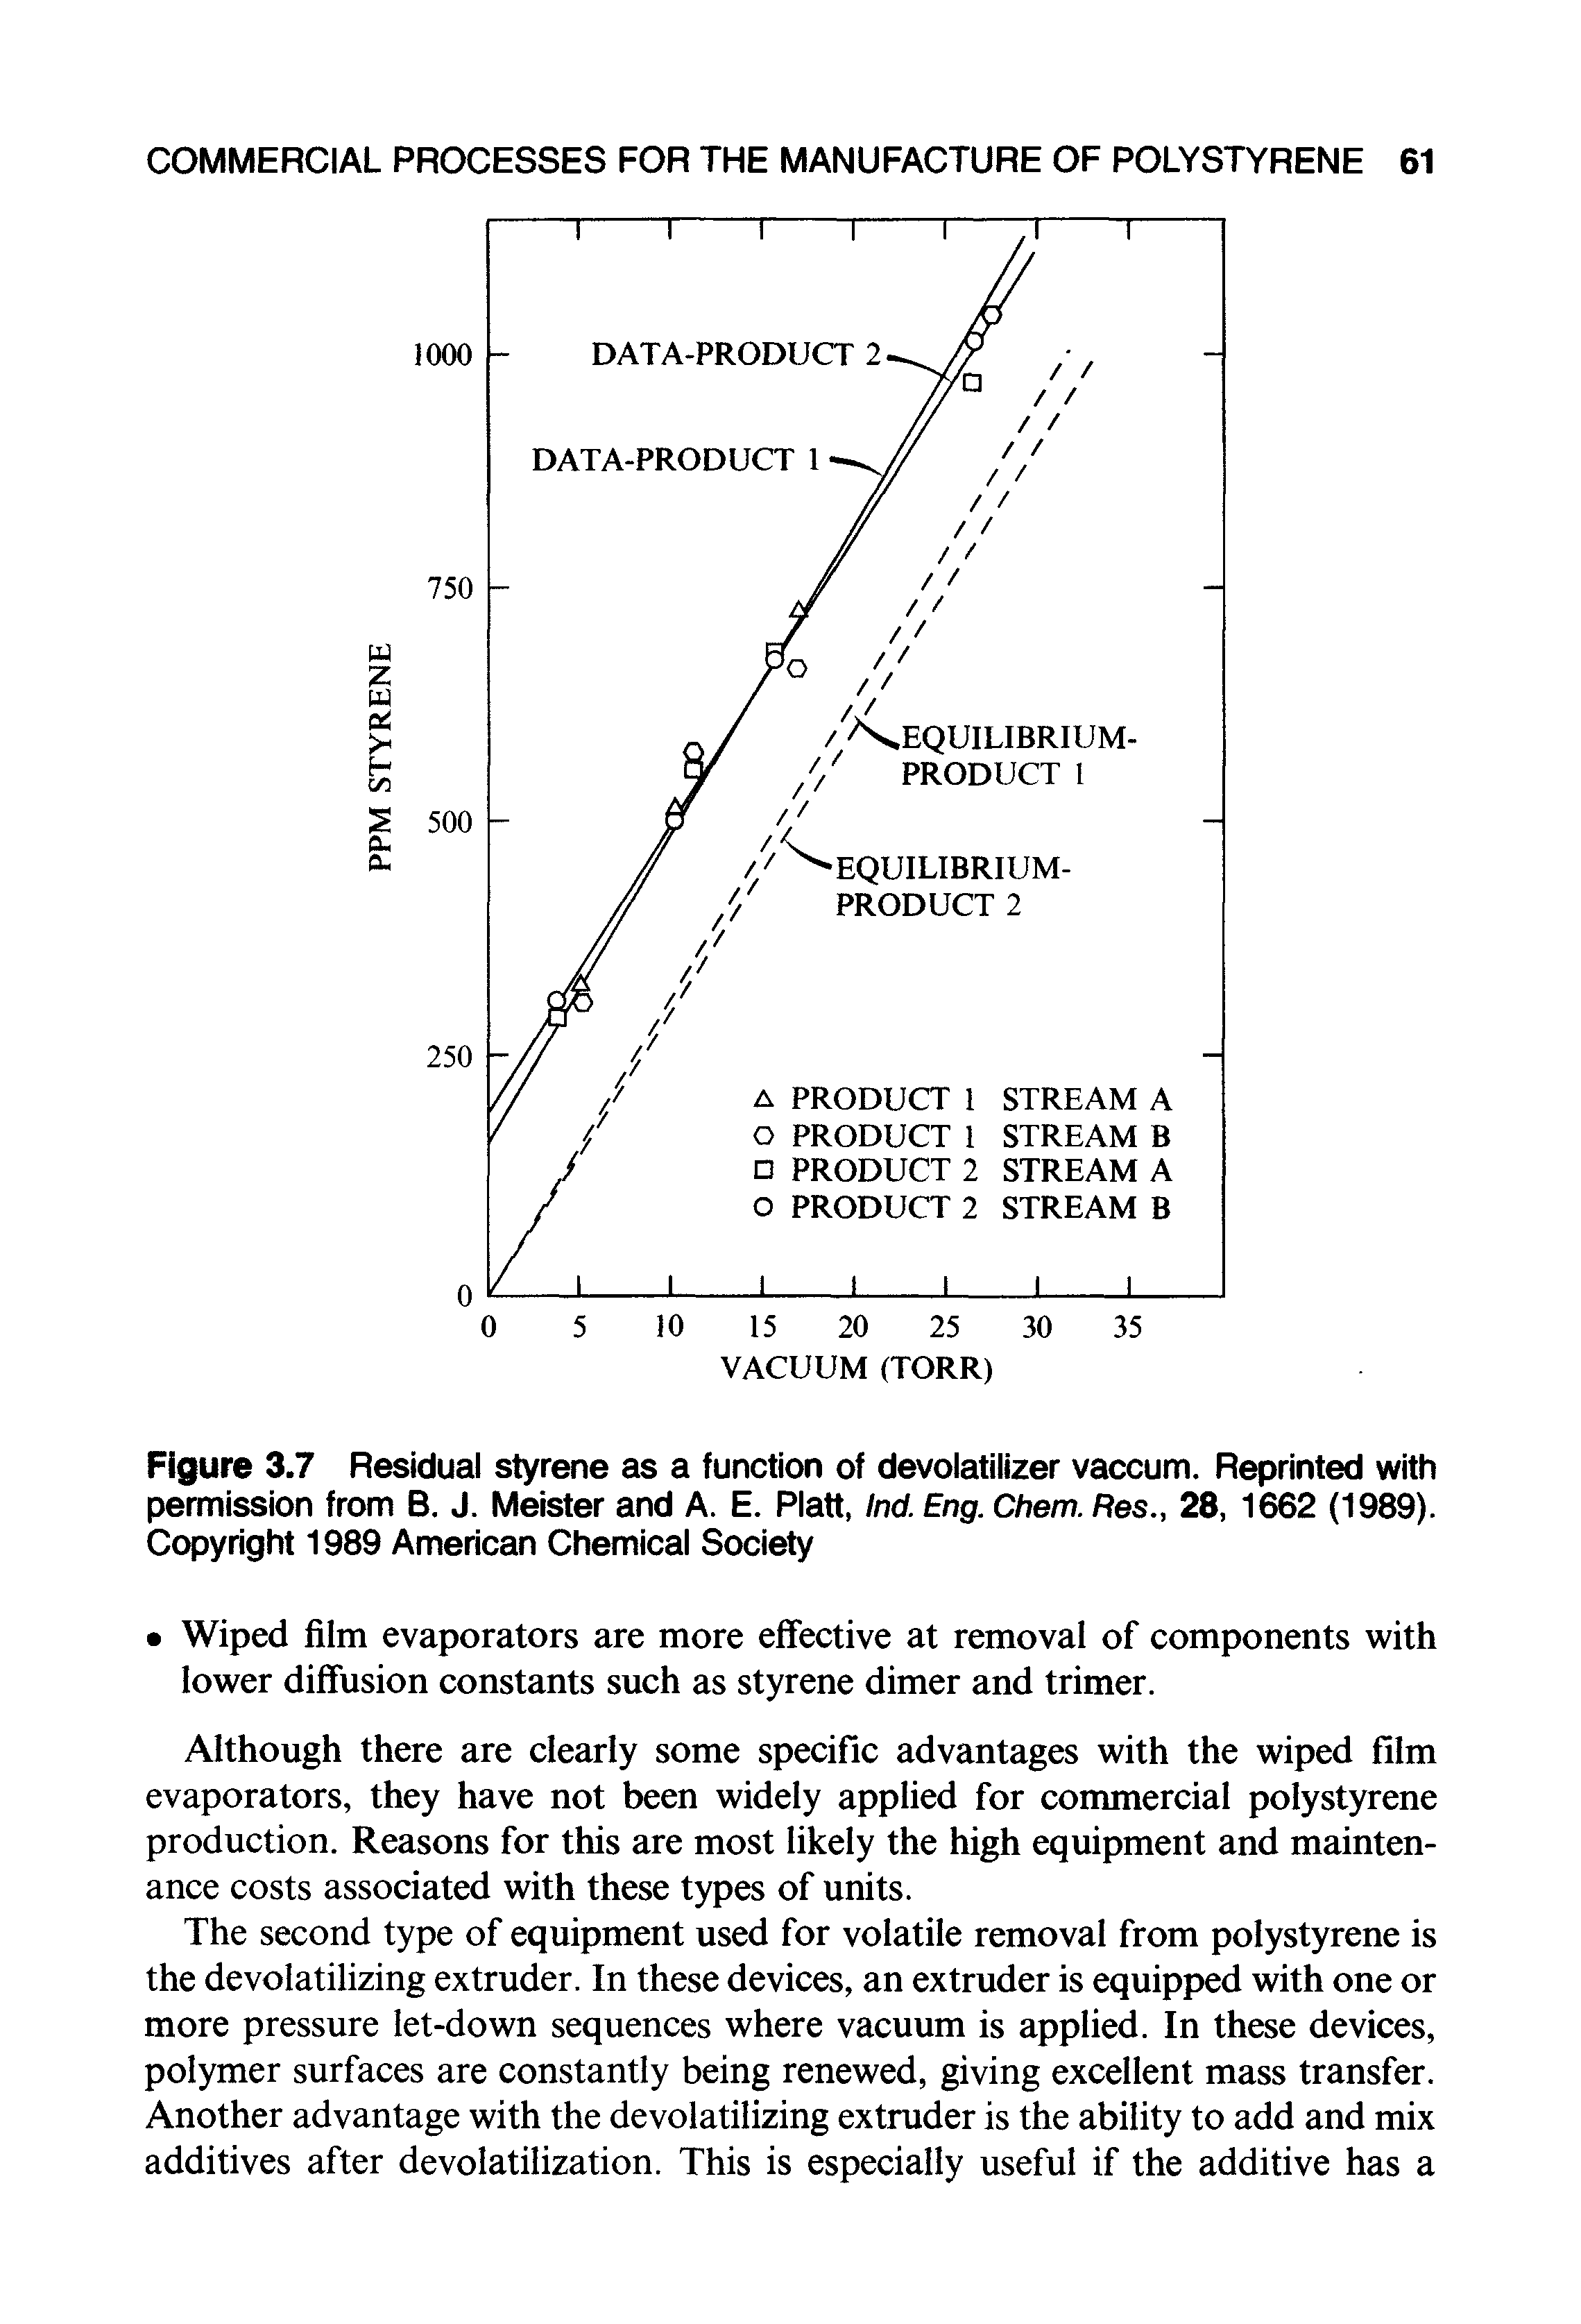 Figure 3.7 Residual styrene as a function of devolatilizer vaccum. Reprinted with permission from B. J. Meister and A. E. Platt, Ind. Eng. Chem. Res., 28, 1662 (1989). Copyright 1989 American Chemical Society...